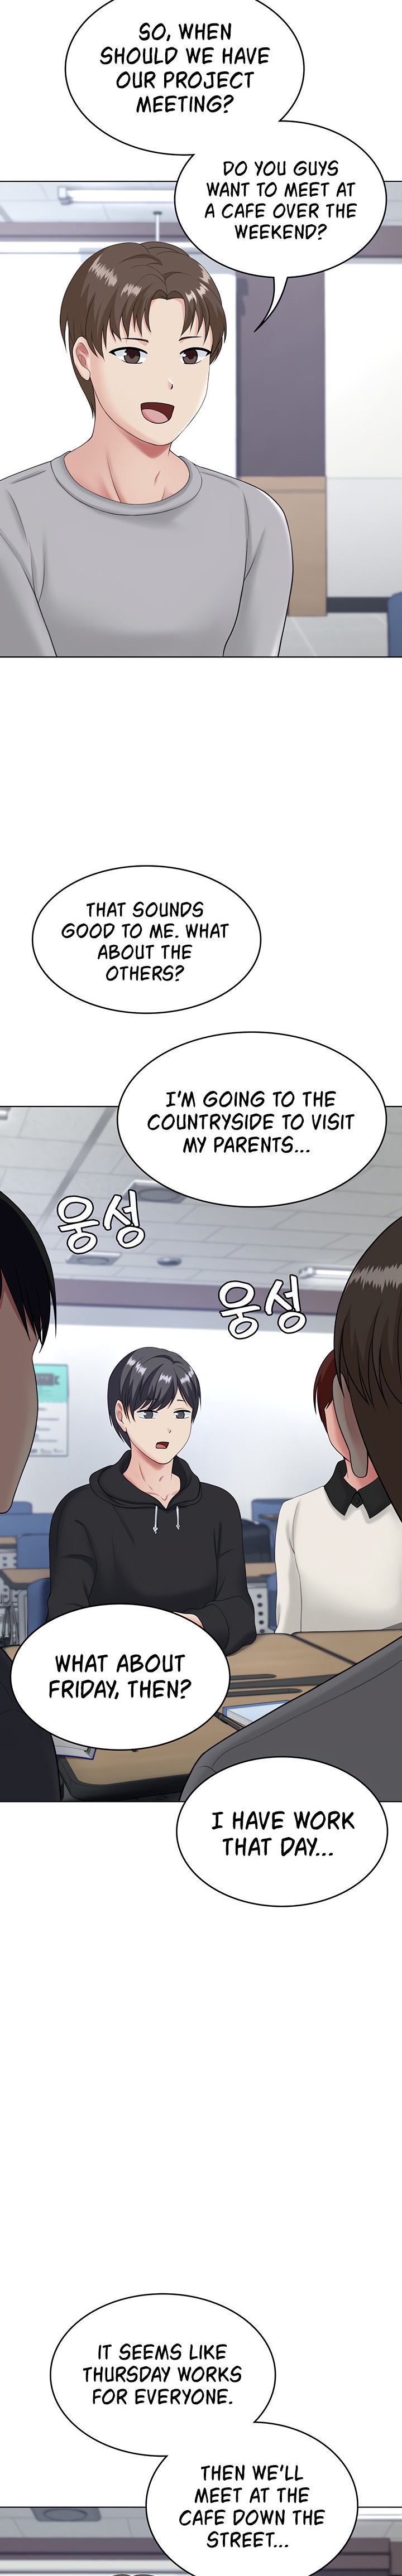 Seoul Kids These Days - Chapter 9 Page 17